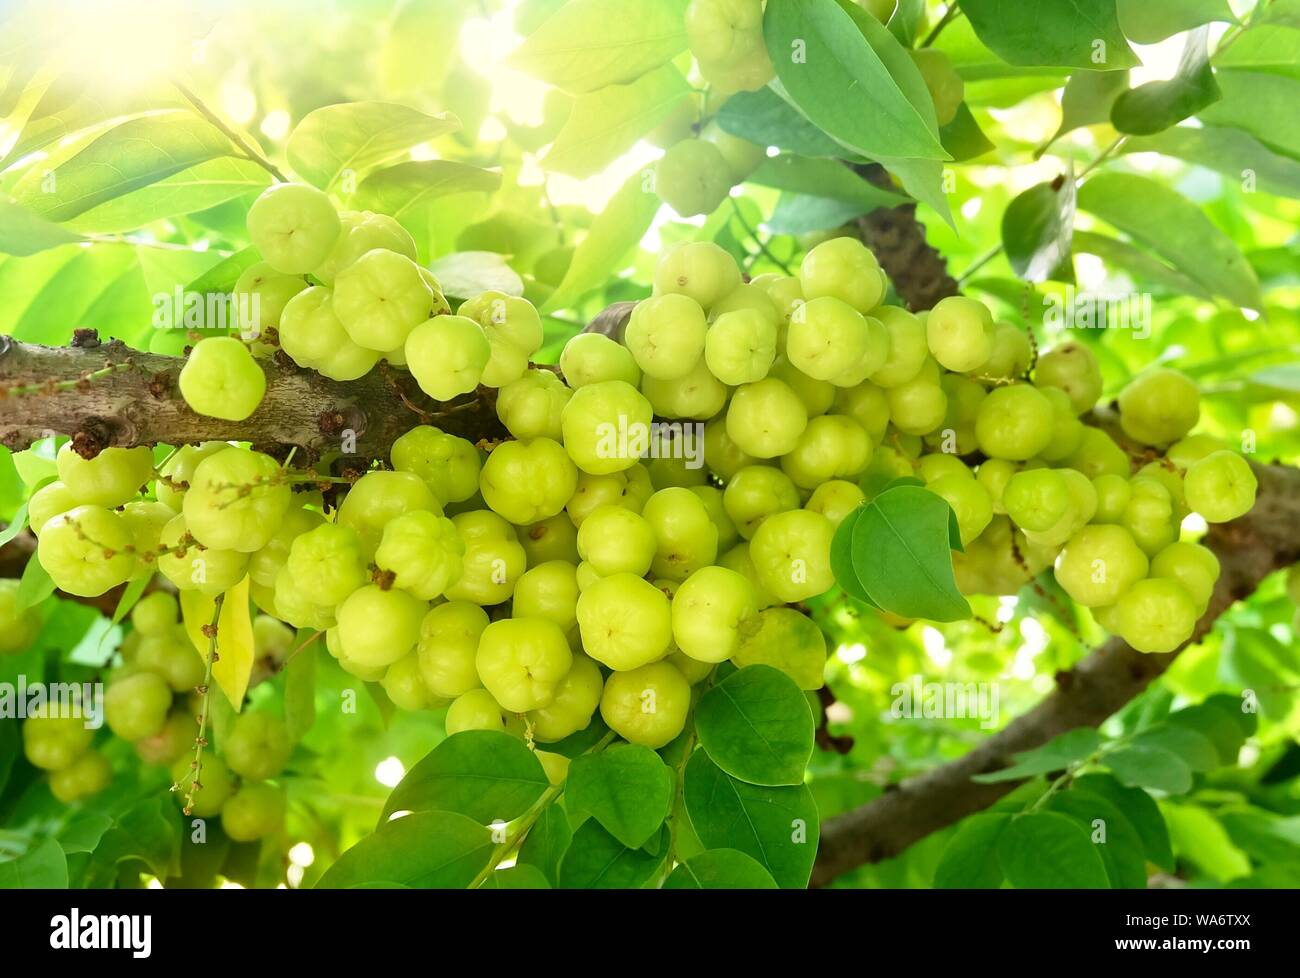 Bunch of Fresh Star Gooseberries With Stem and Green Leaves Hanging on Tree Branch. Stock Photo